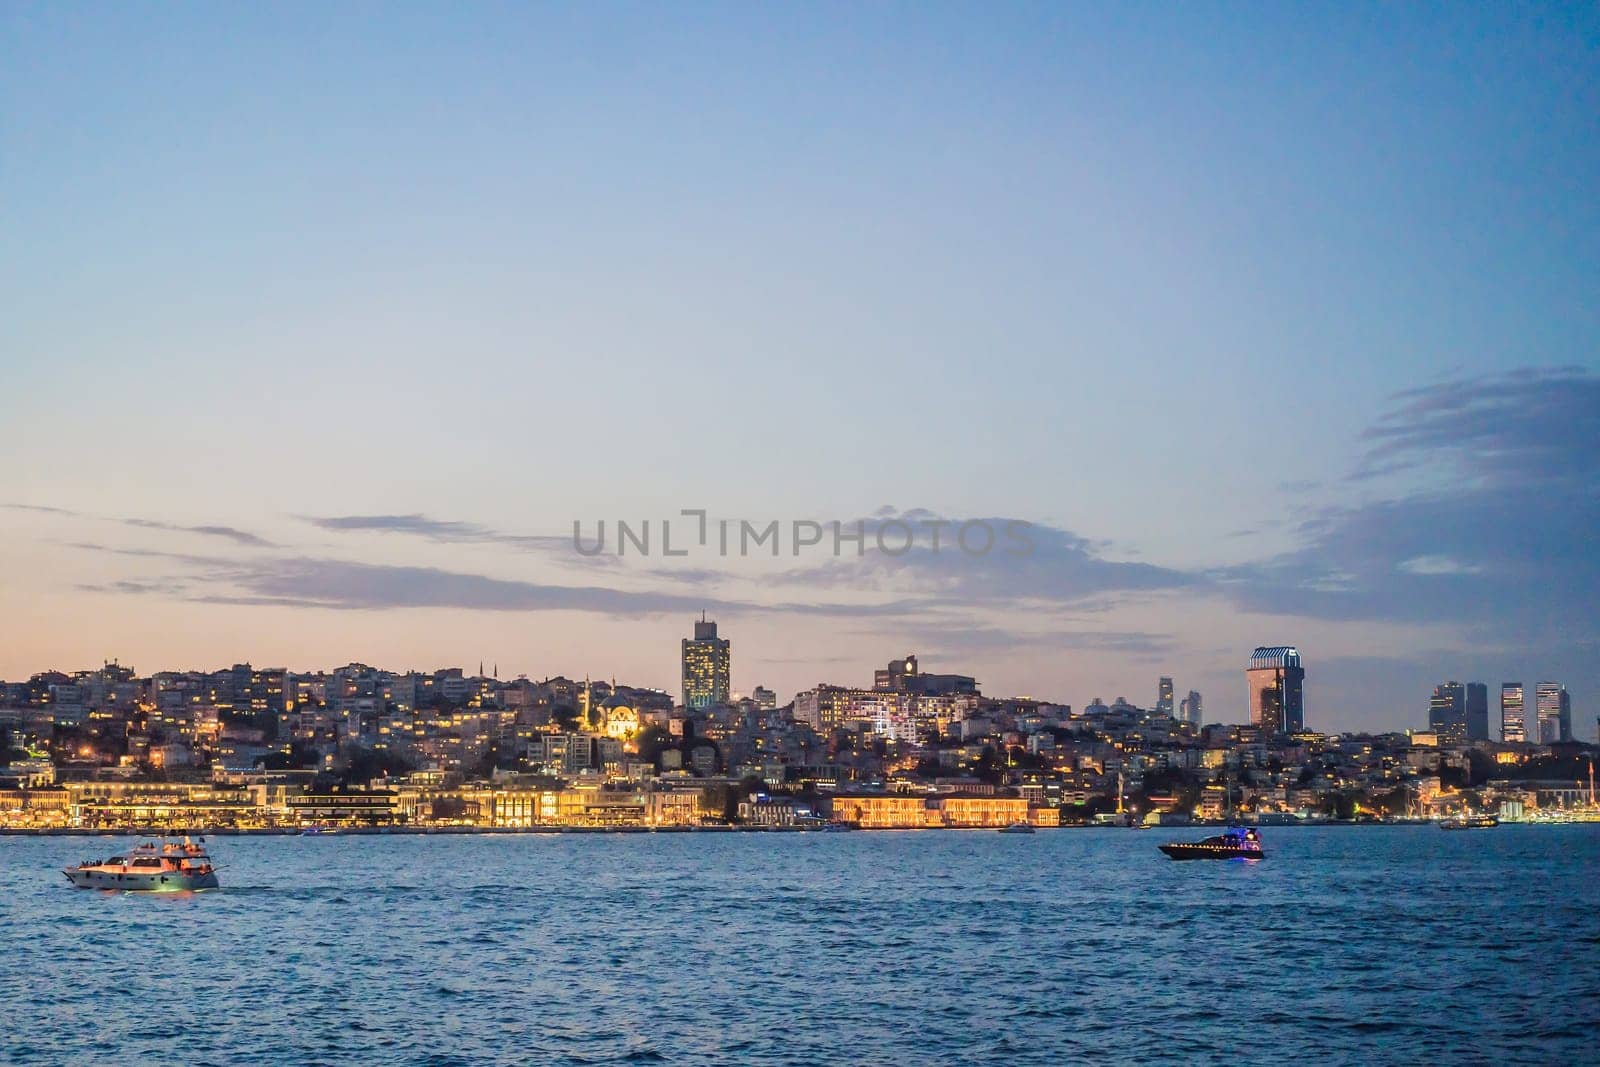 Istanbul at sunset, Turkey. Tourist boat sails on Golden Horn in summer. Beautiful sunny view of Istanbul waterfront with old mosque. Concept of travel, tourism and vacation in Istanbul and Turkey. Turkiye.